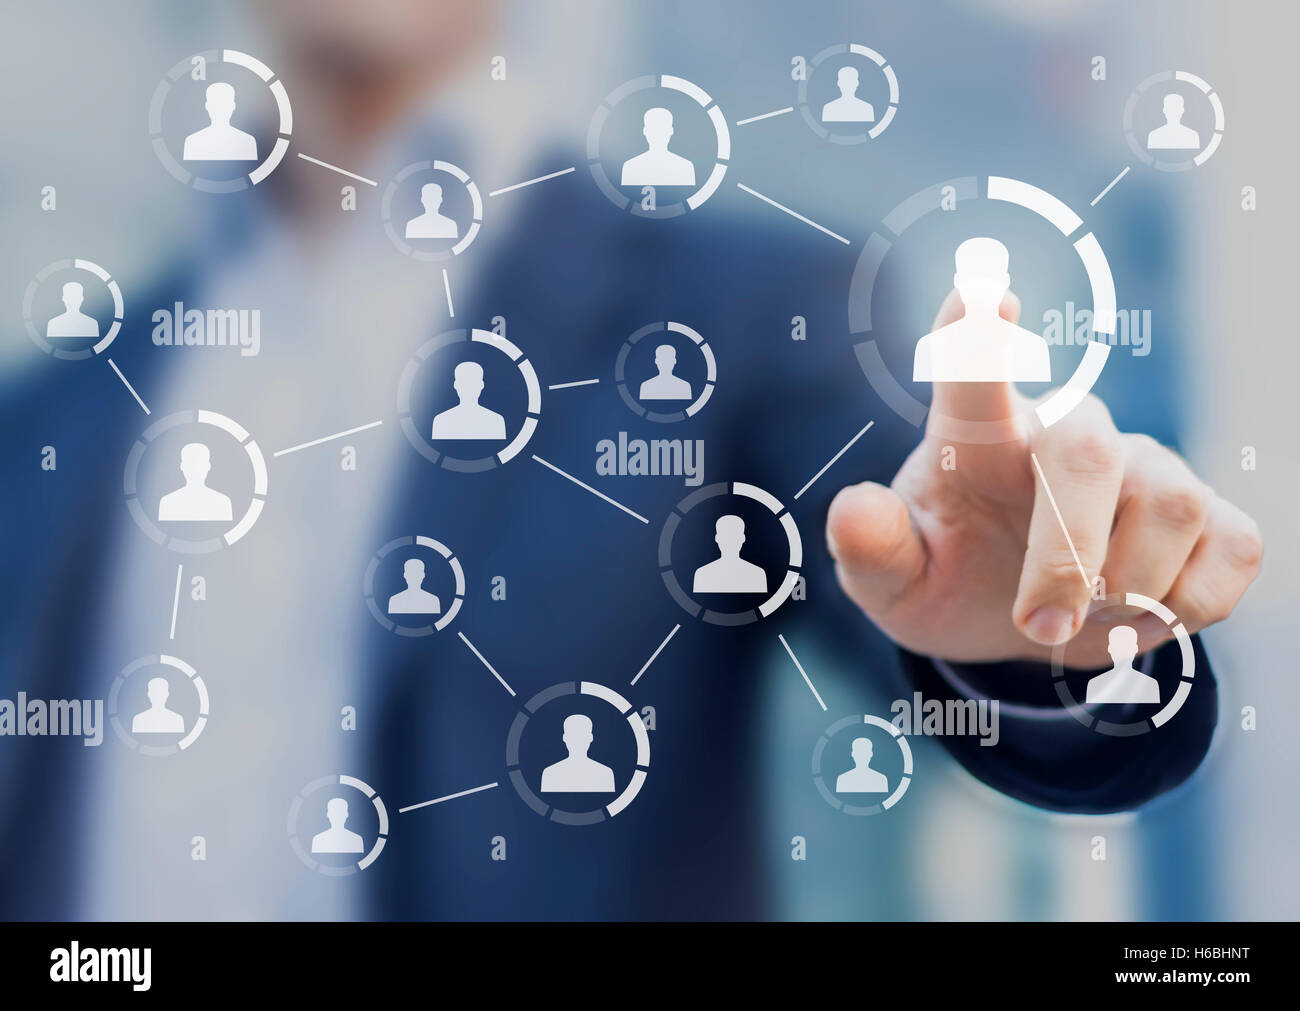 Social network structure showing connections between people’s profiles, virtual interface with person in background Stock Photo